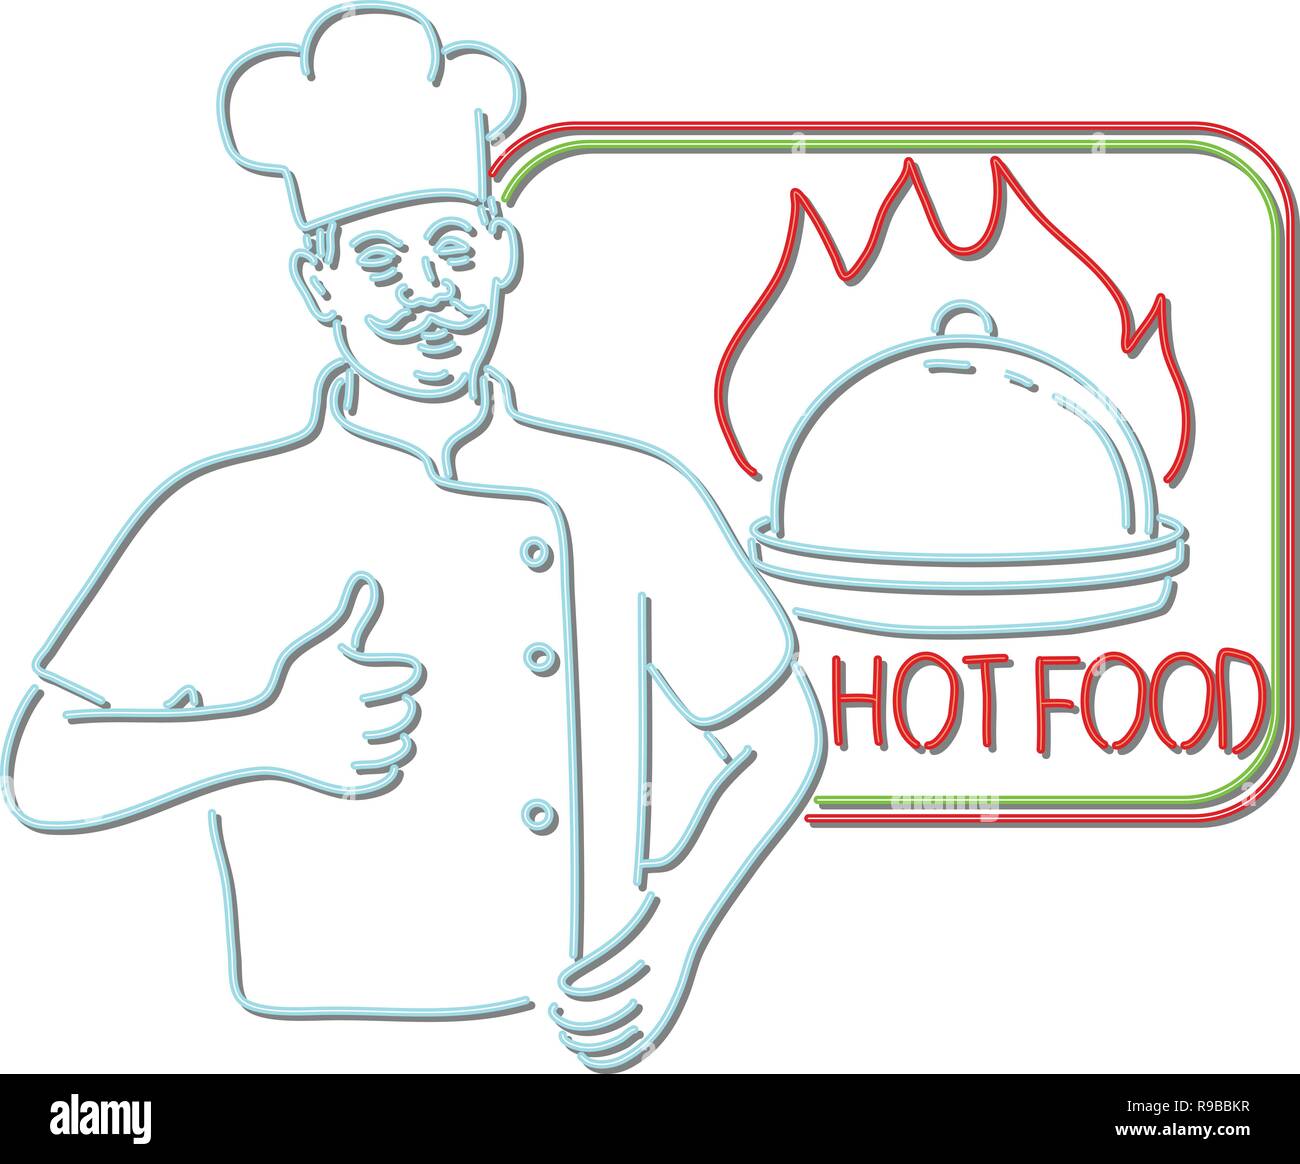 Retro style illustration showing a 1990s neon sign light signage lighting of a chef, cook or baker with thumbs up beside dish on flames or fire with s Stock Vector